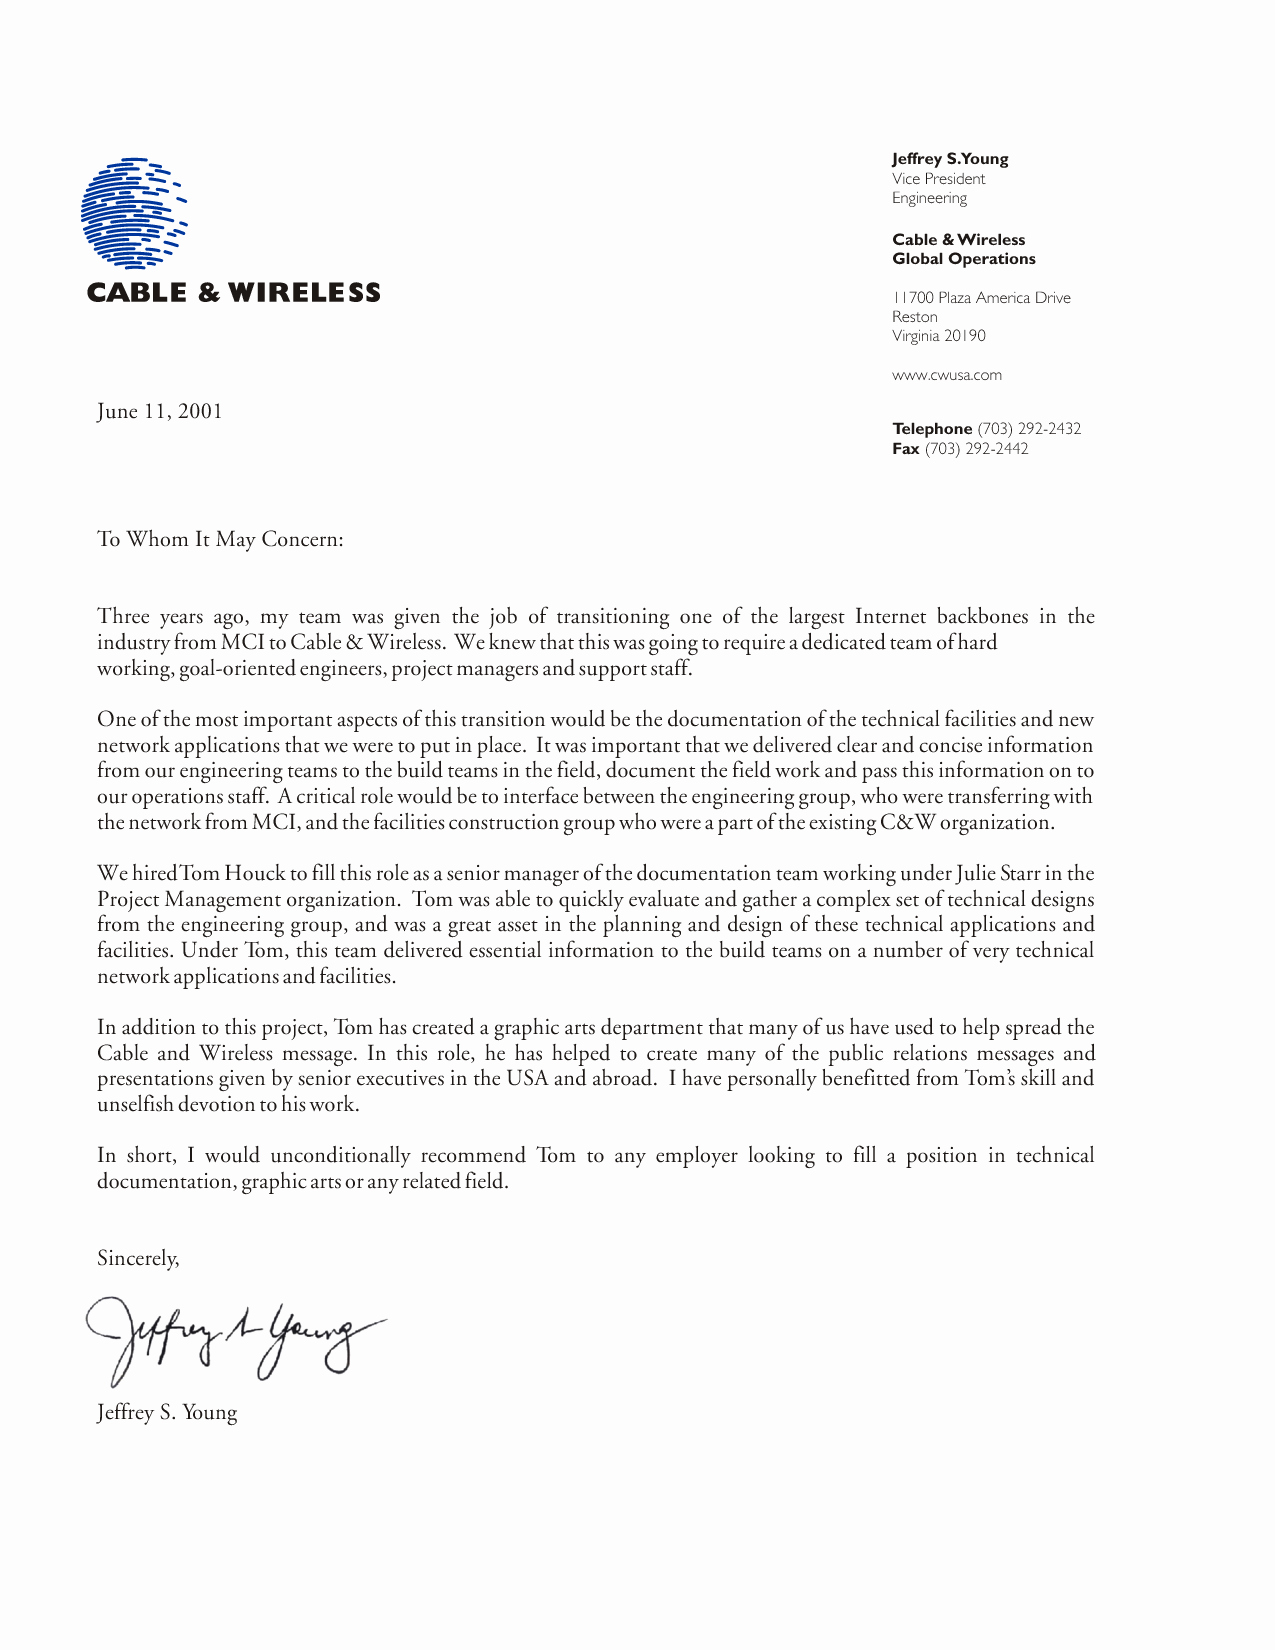 Recommendation Letter Sample From Employer Inspirational Re Mendation Letter From Employer